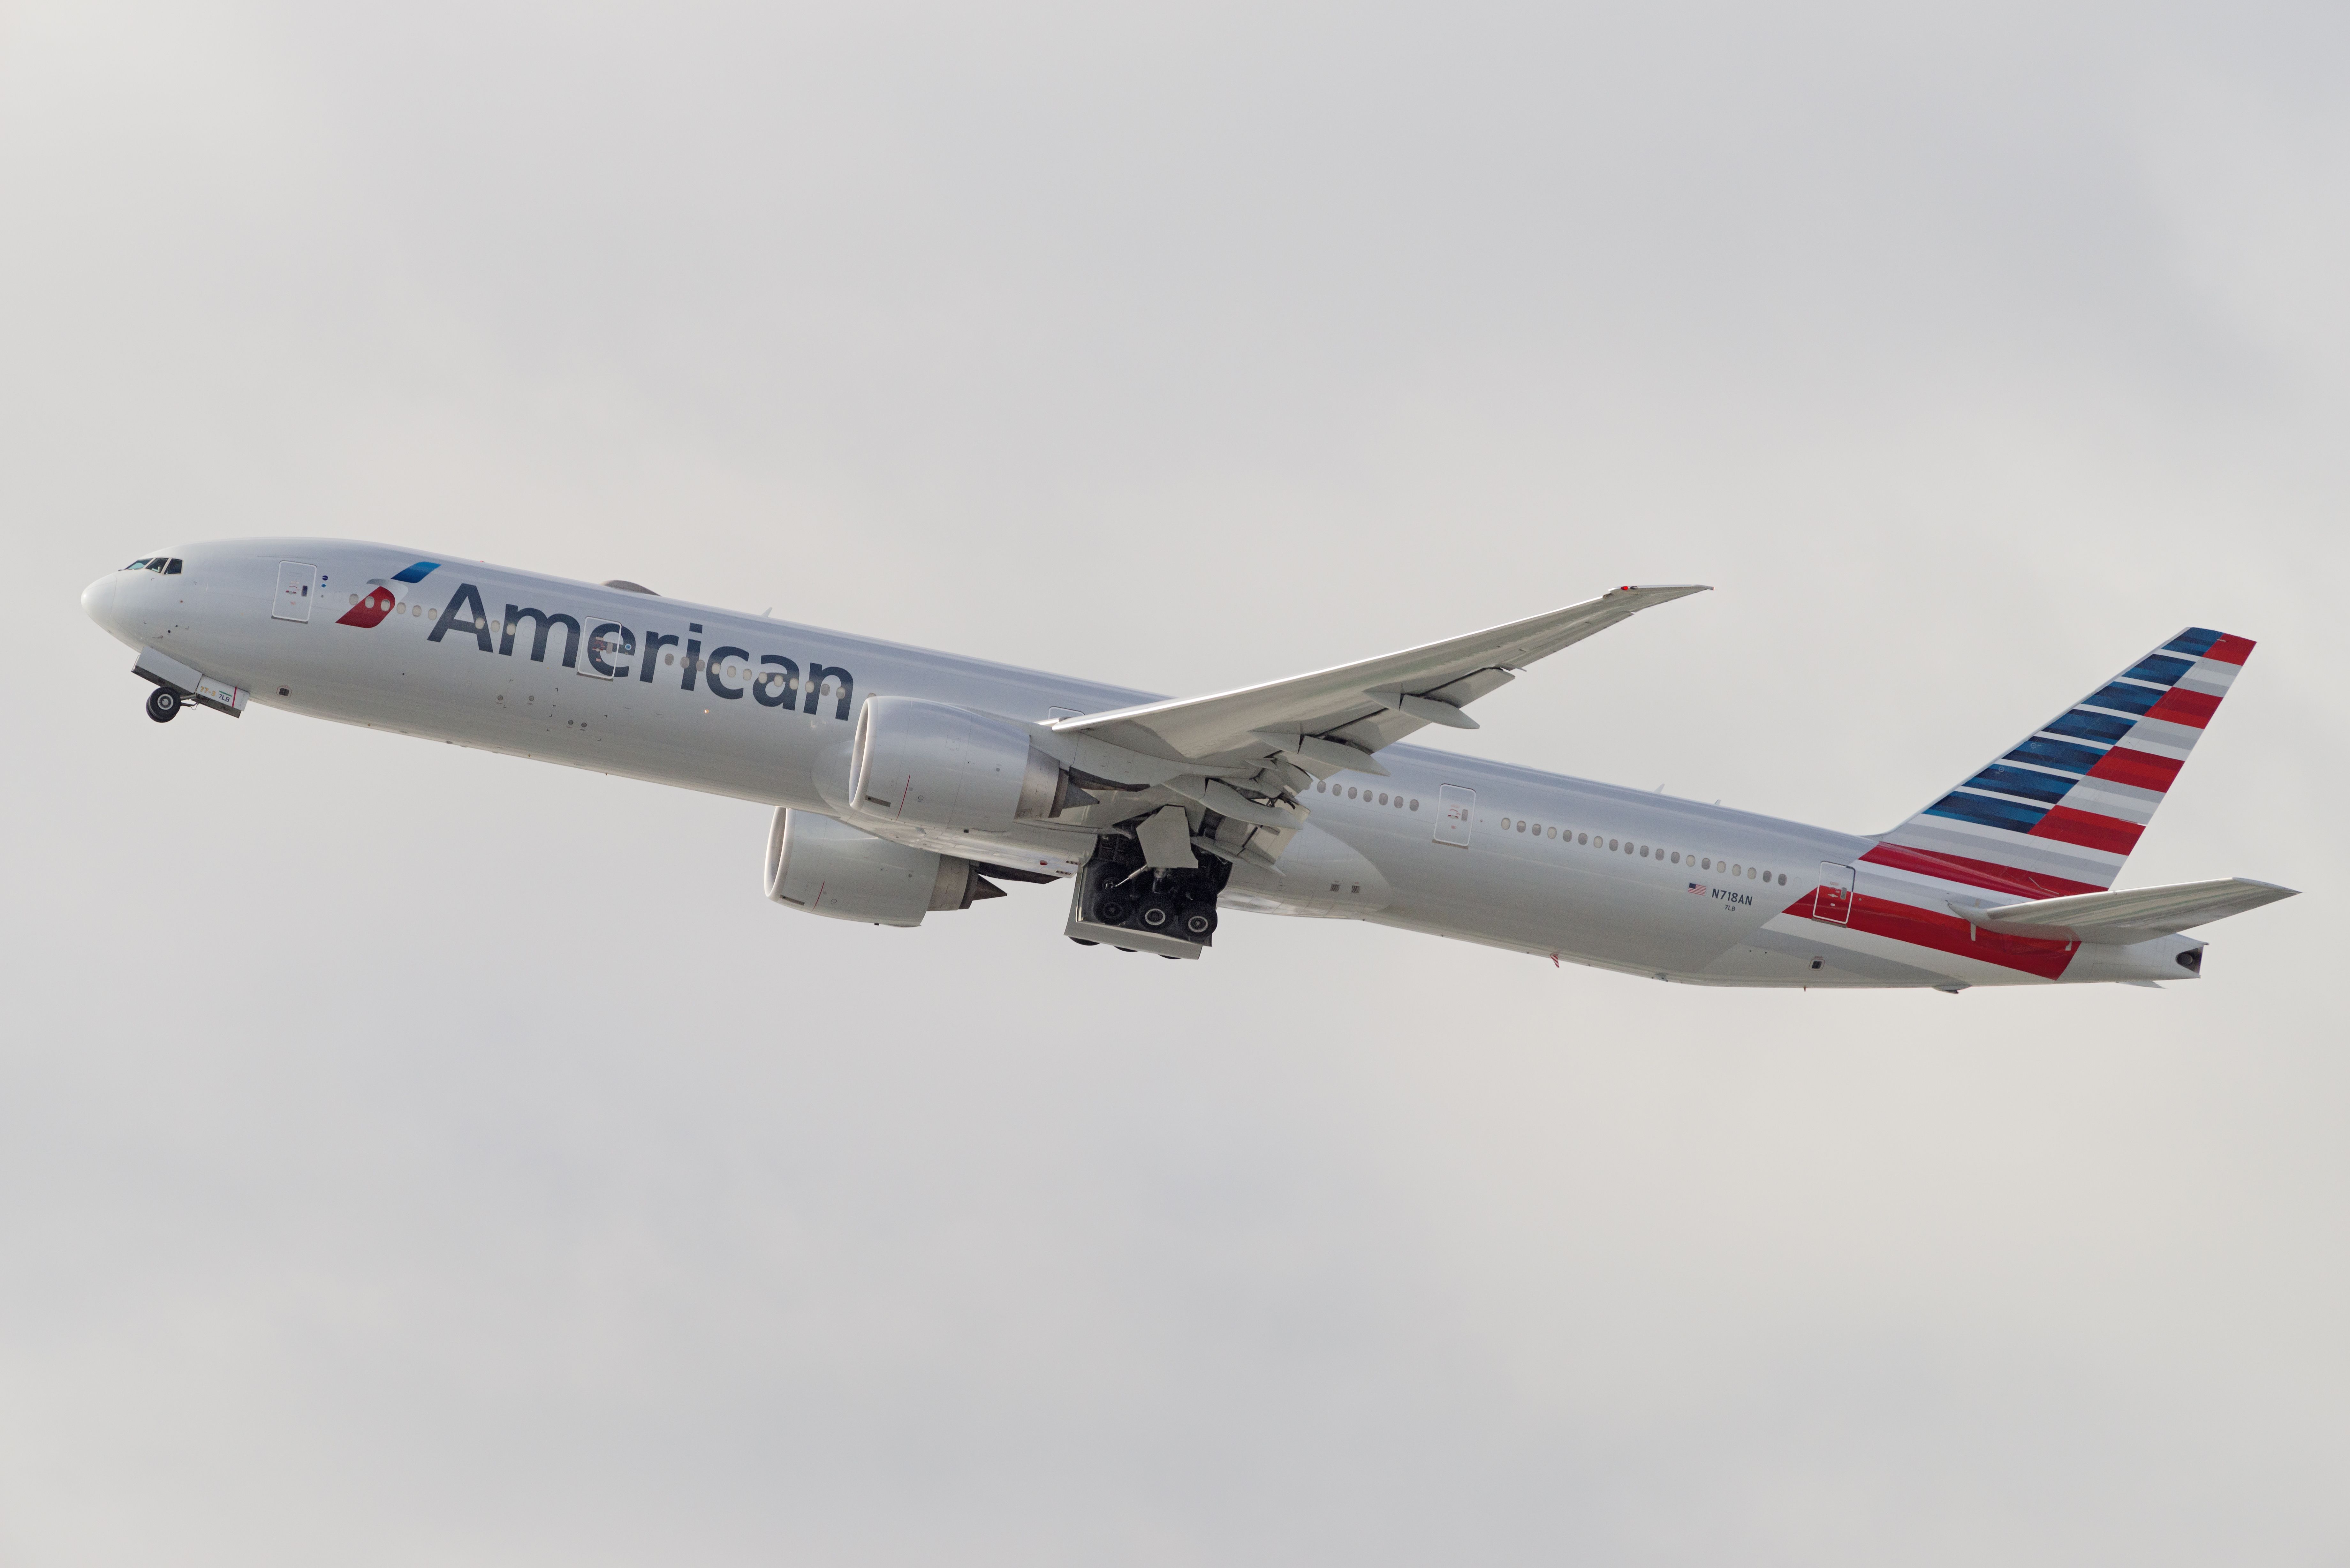 American Airlines Boeing 777-300ER taking off from Los Angeles International Airport.